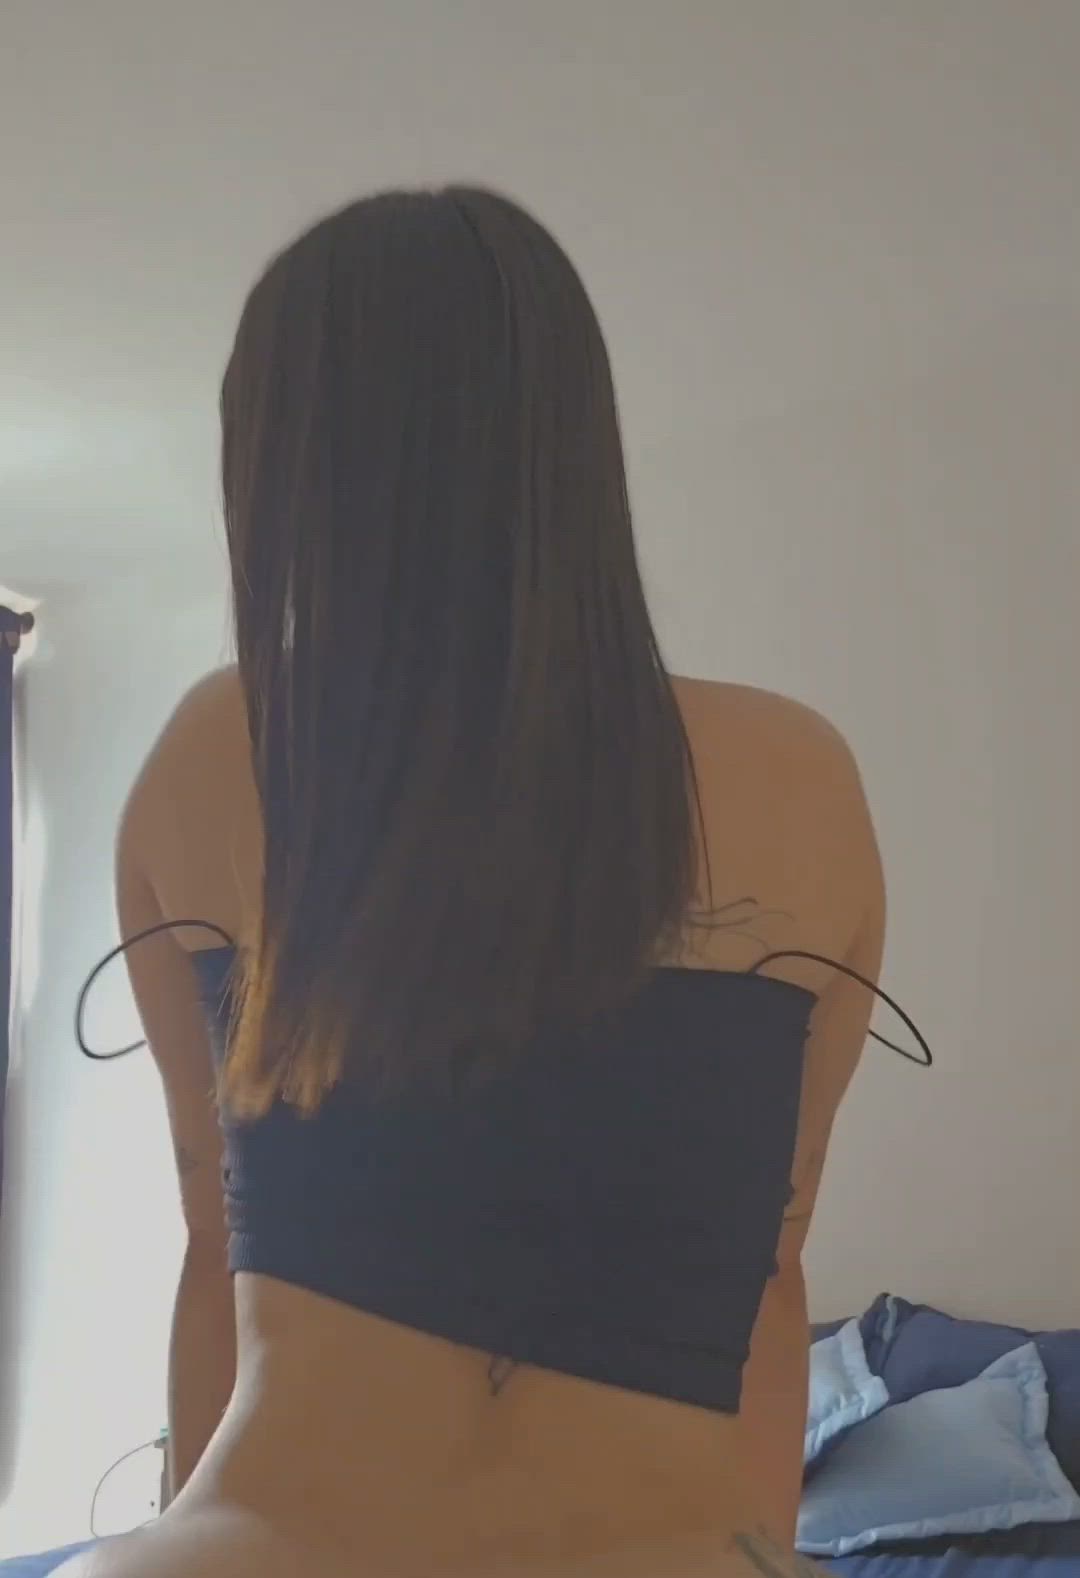 Amateur porn video with onlyfans model sofiakross <strong>@sofiakross</strong>